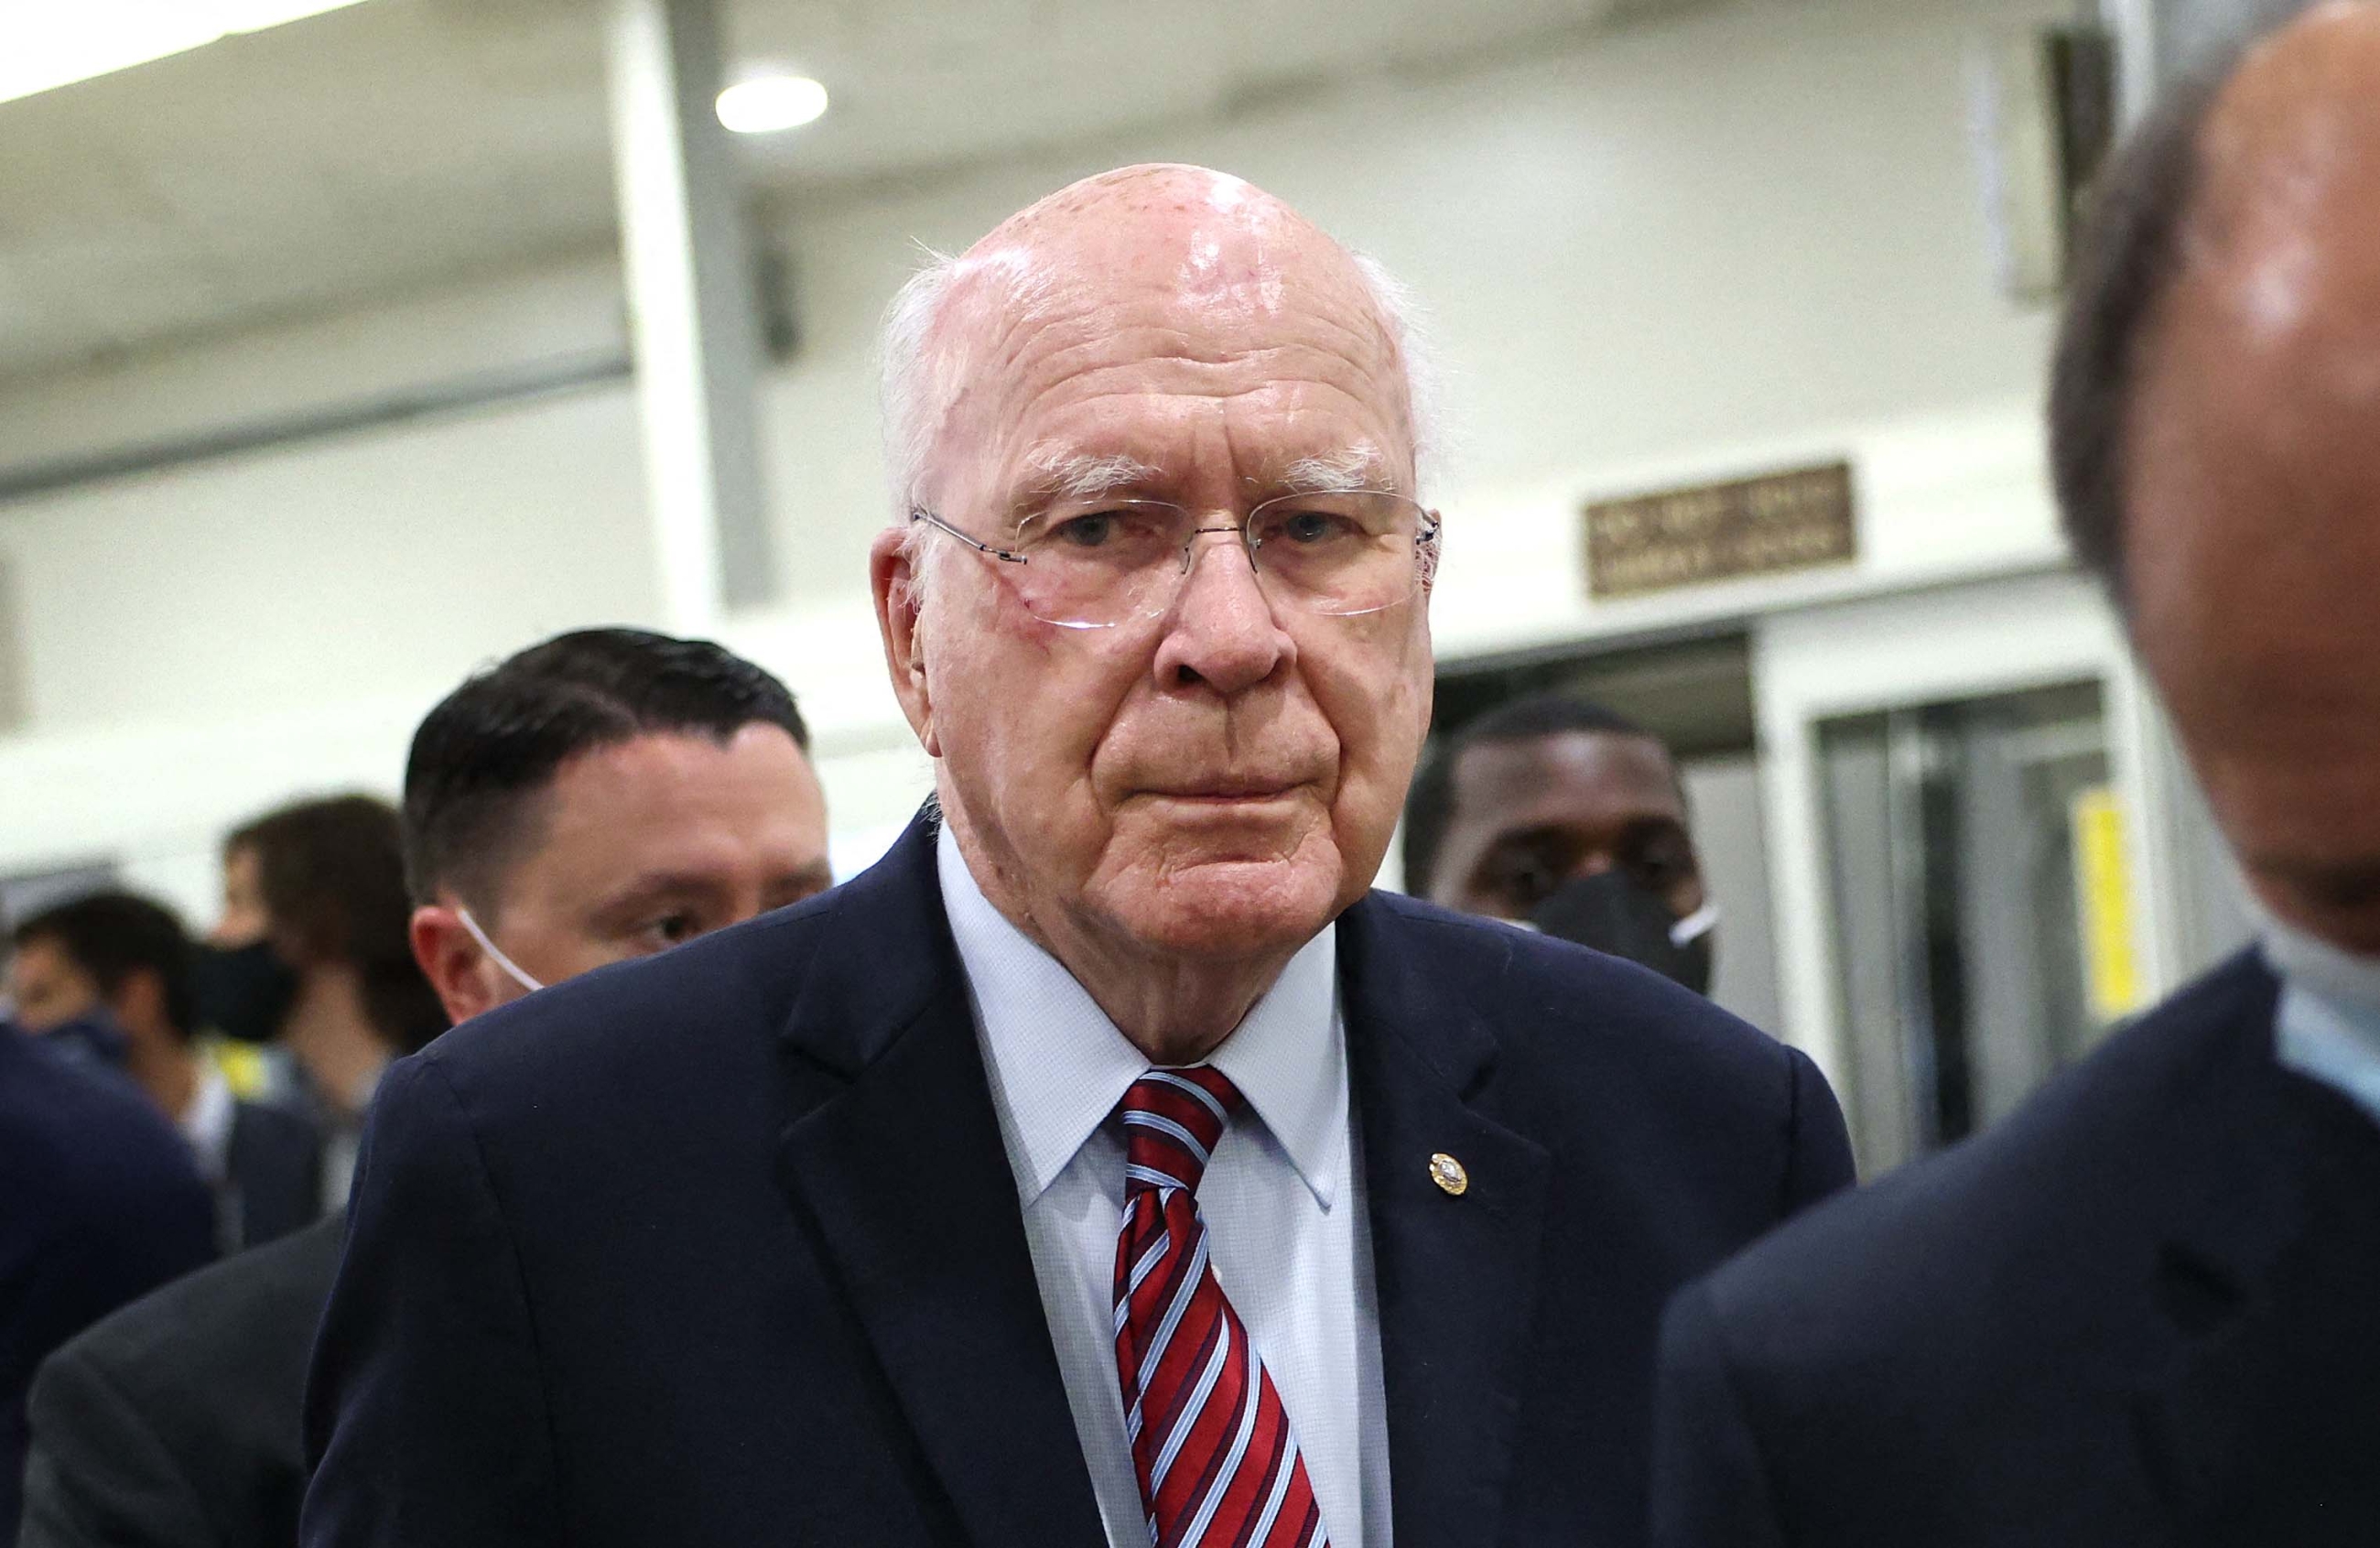 Senator Leahy has worked for years on the issue of issuing condolence payments to civilians killed as a result of US military actions.